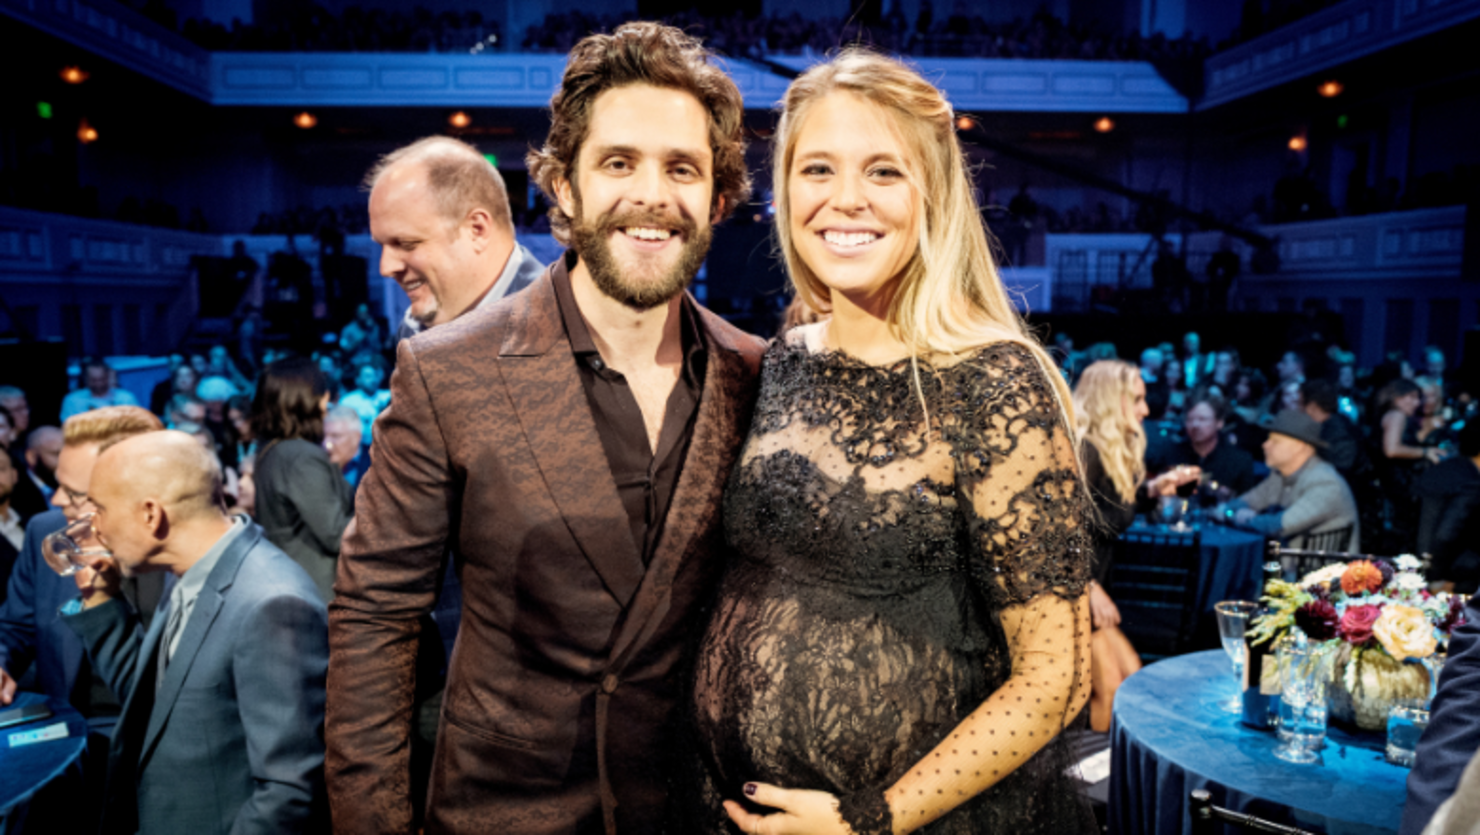 Thomas Rhett And Lauren Akins Celebrate Thanksgiving With Their 3 Daughters